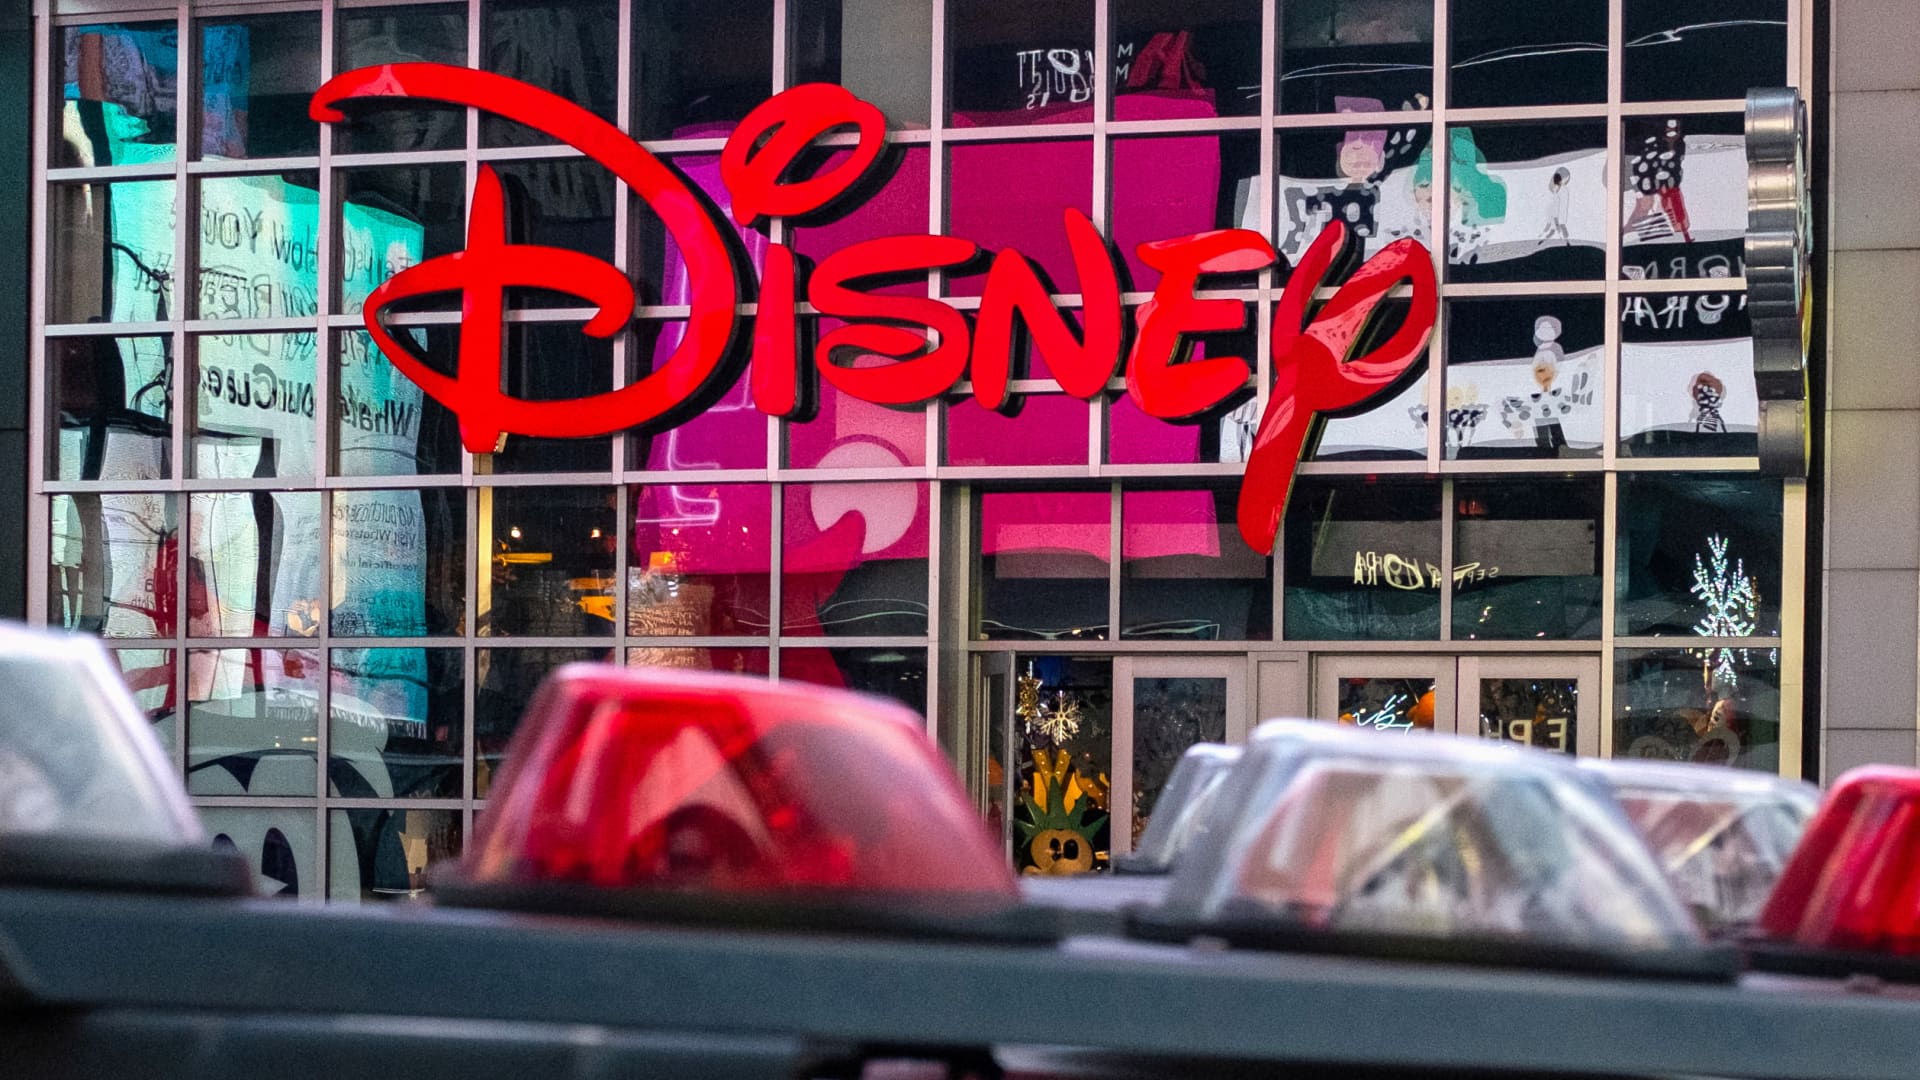 Disney reports earnings Tuesday. Here’s what Wall Street is watching [Video]